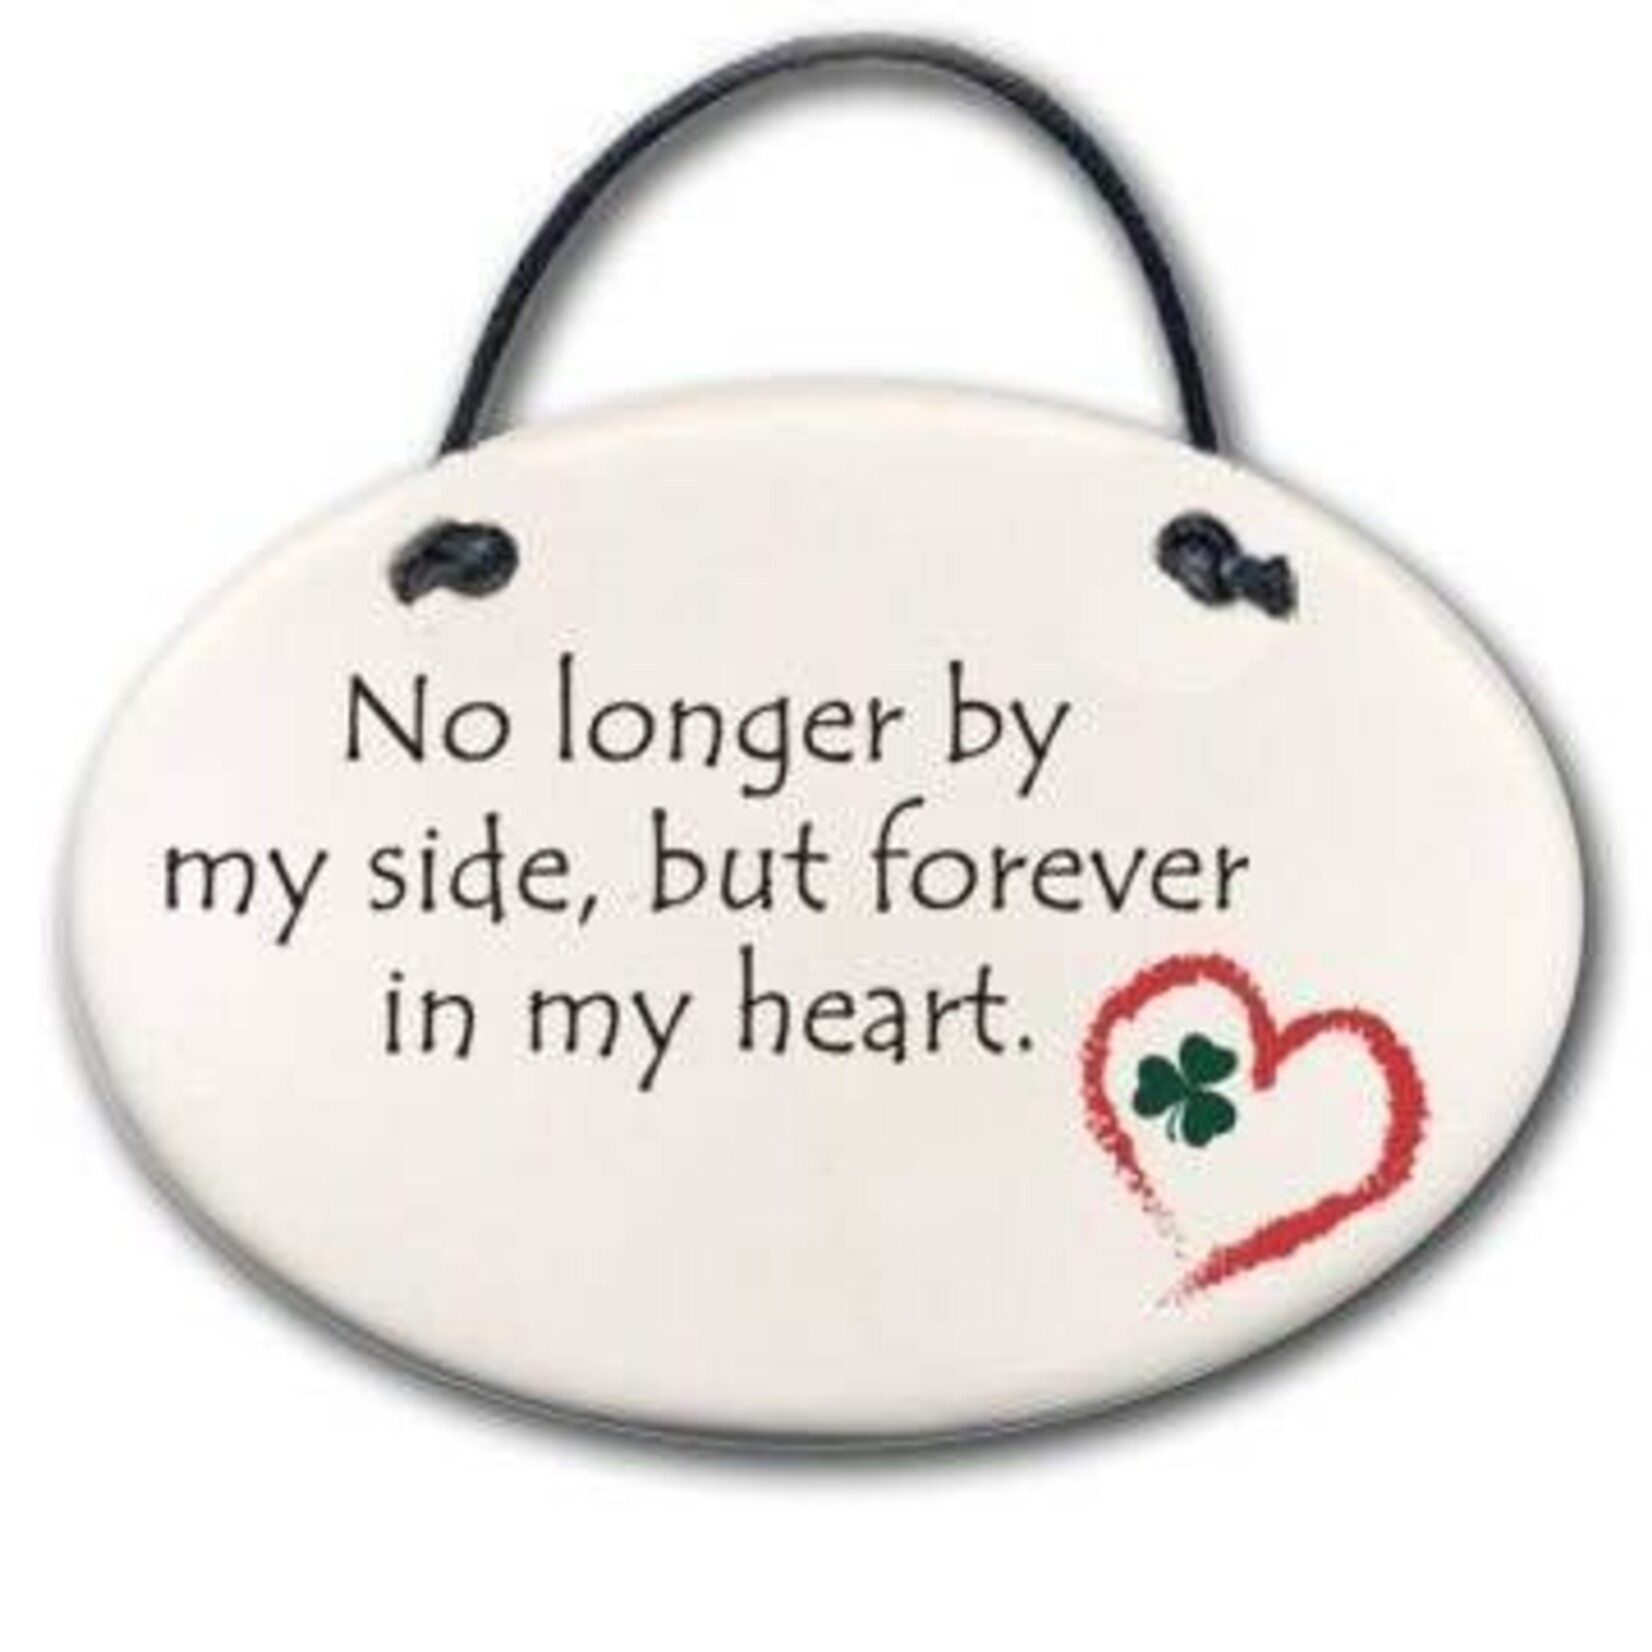 August Ceramics "No Longer By My Side" Disk Ornament